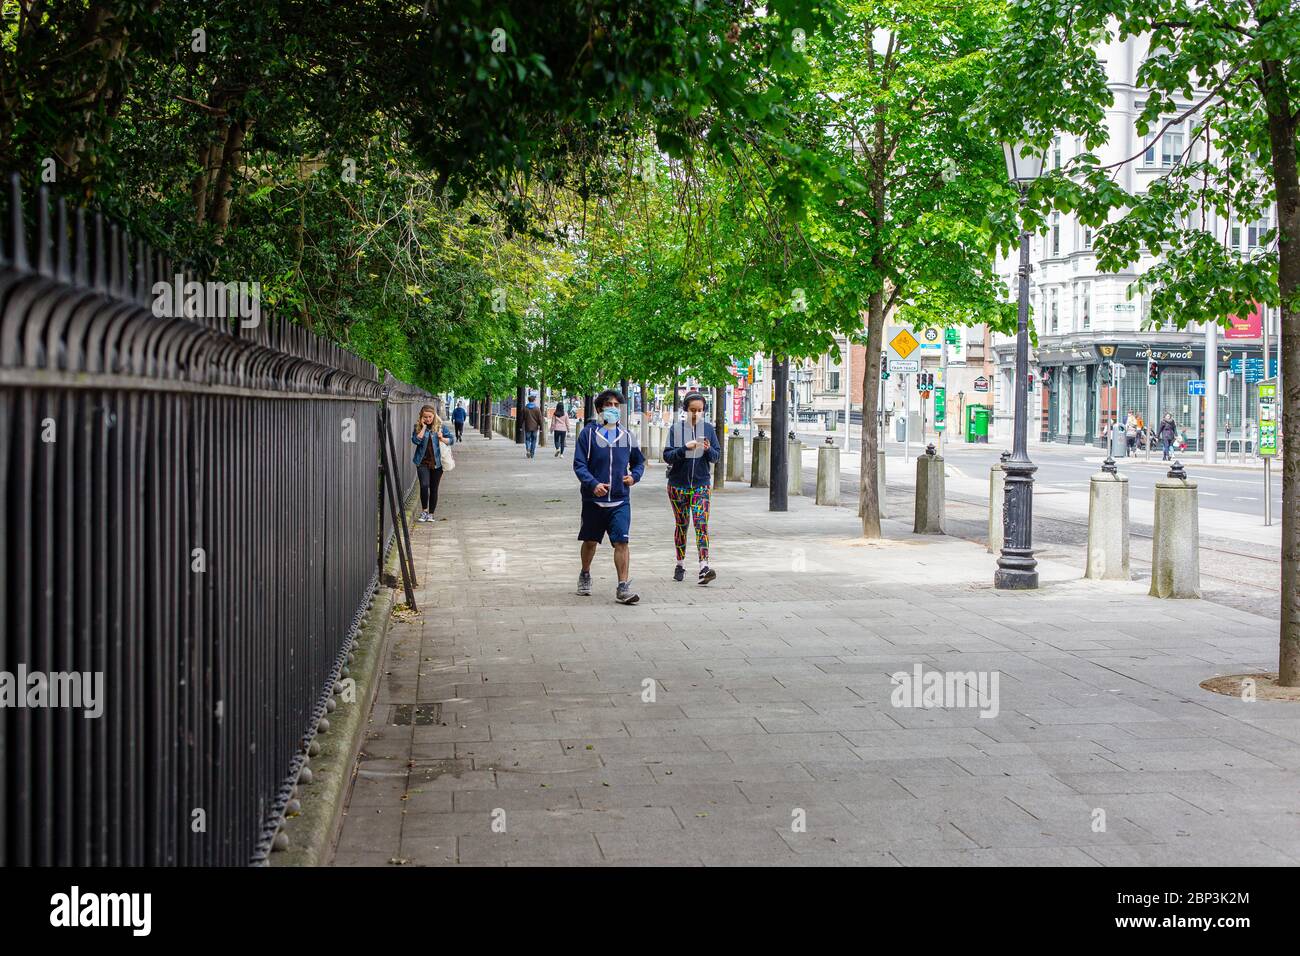 Pedestrians walking in Dublin wearing face masks and adhering to social distancing rule by keeping safe distance while outdoor in public spaces. Stock Photo